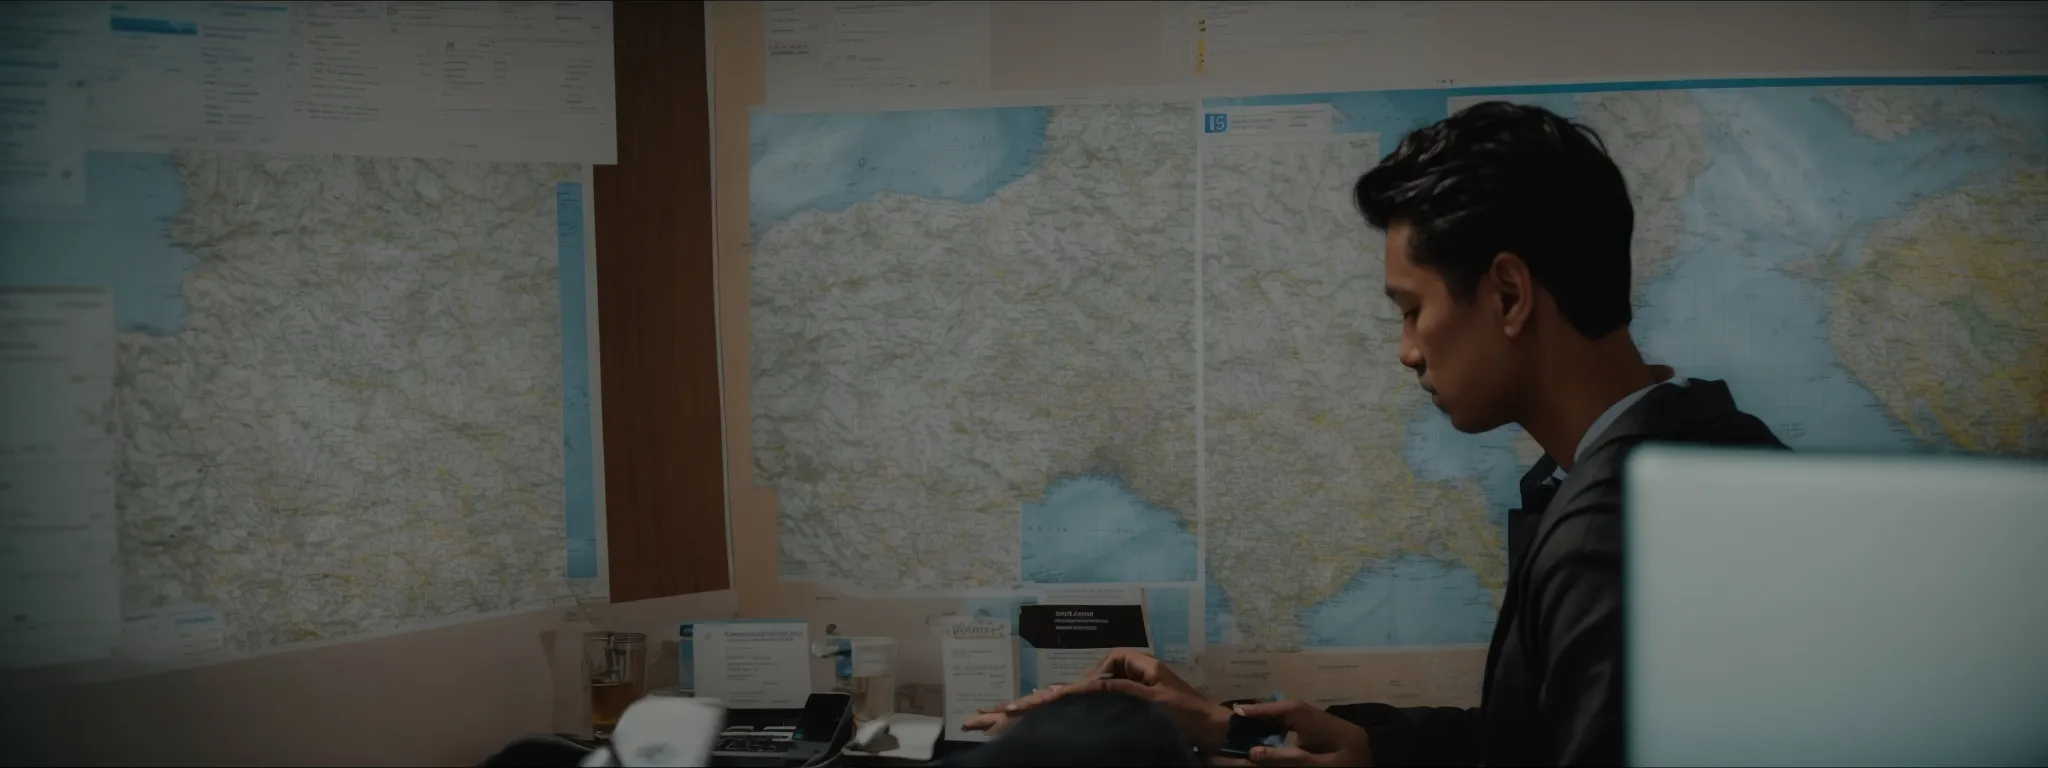 a business owner reviews a map dotted with markers while a computer displays search engine rankings in the background.